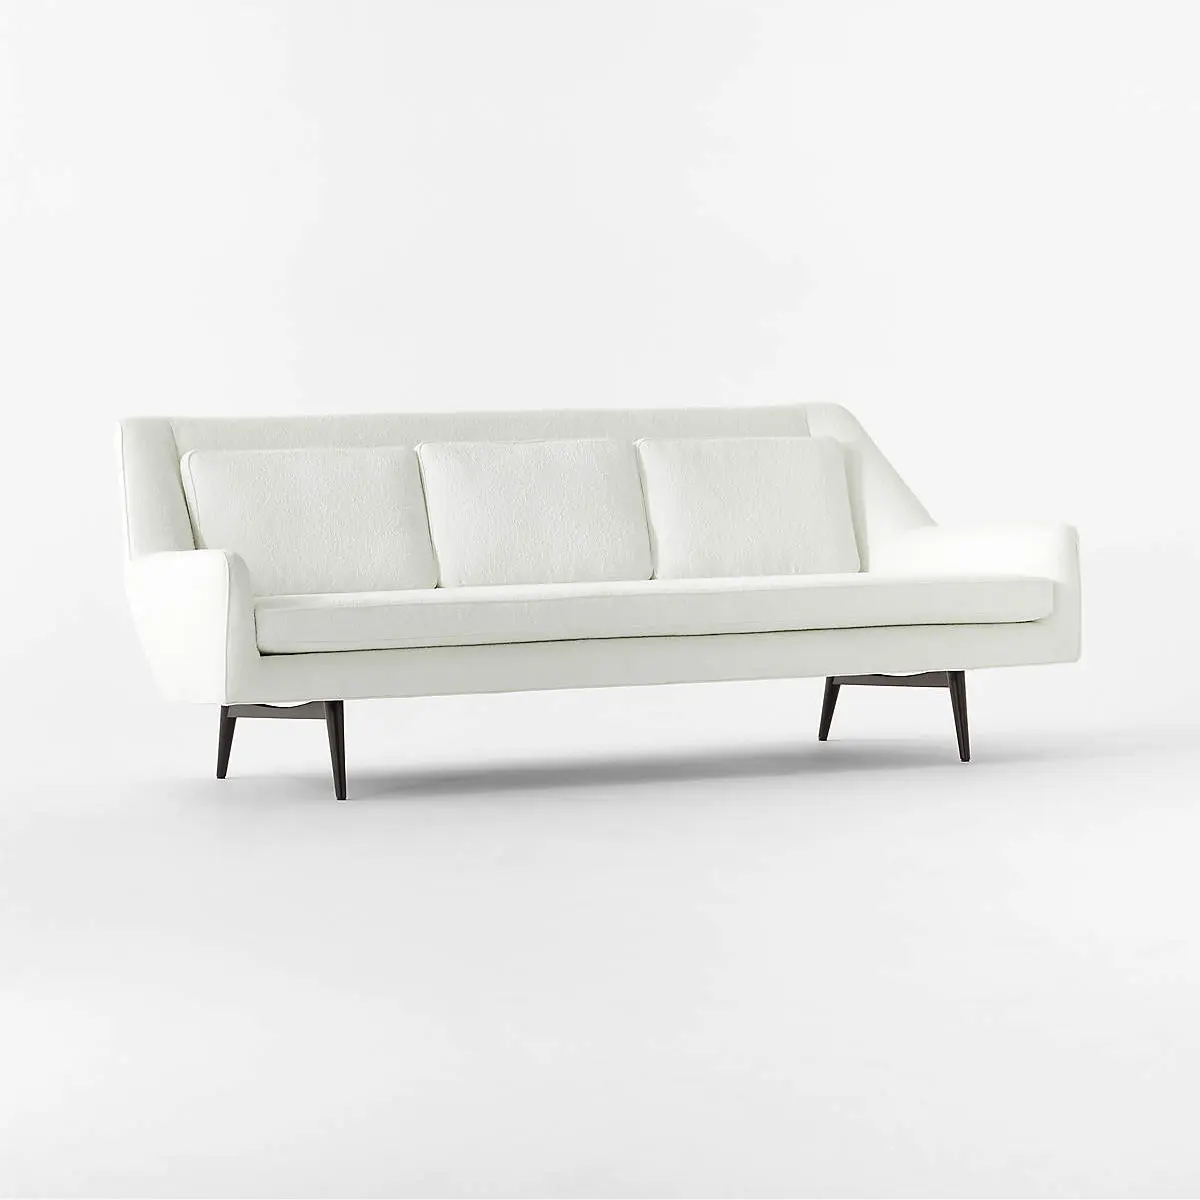 CB2: Up to 70% OFF Clearance Furniture